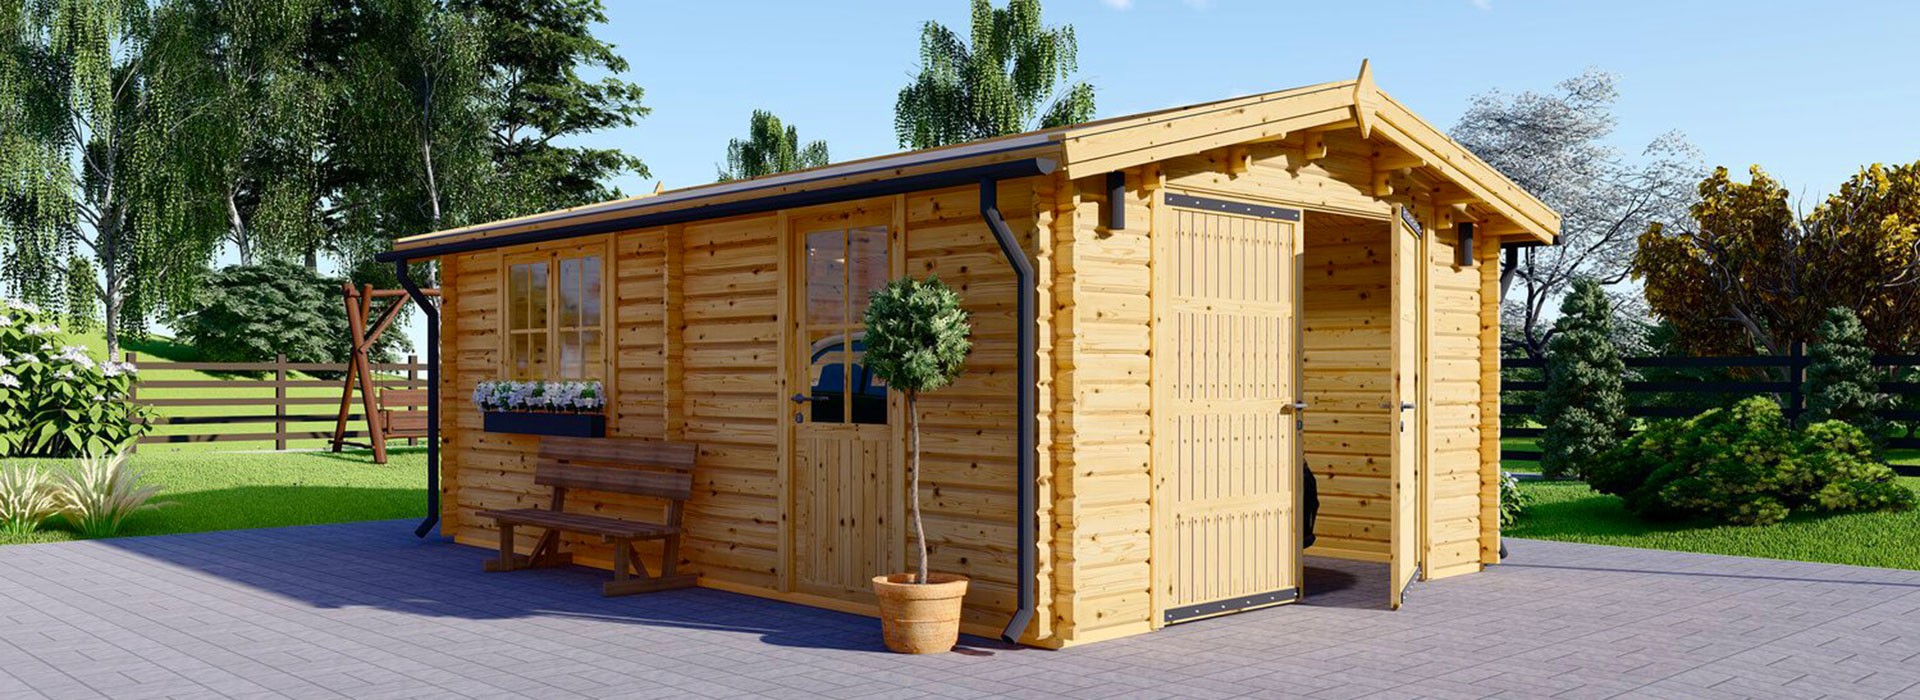 Wooden garages for one car